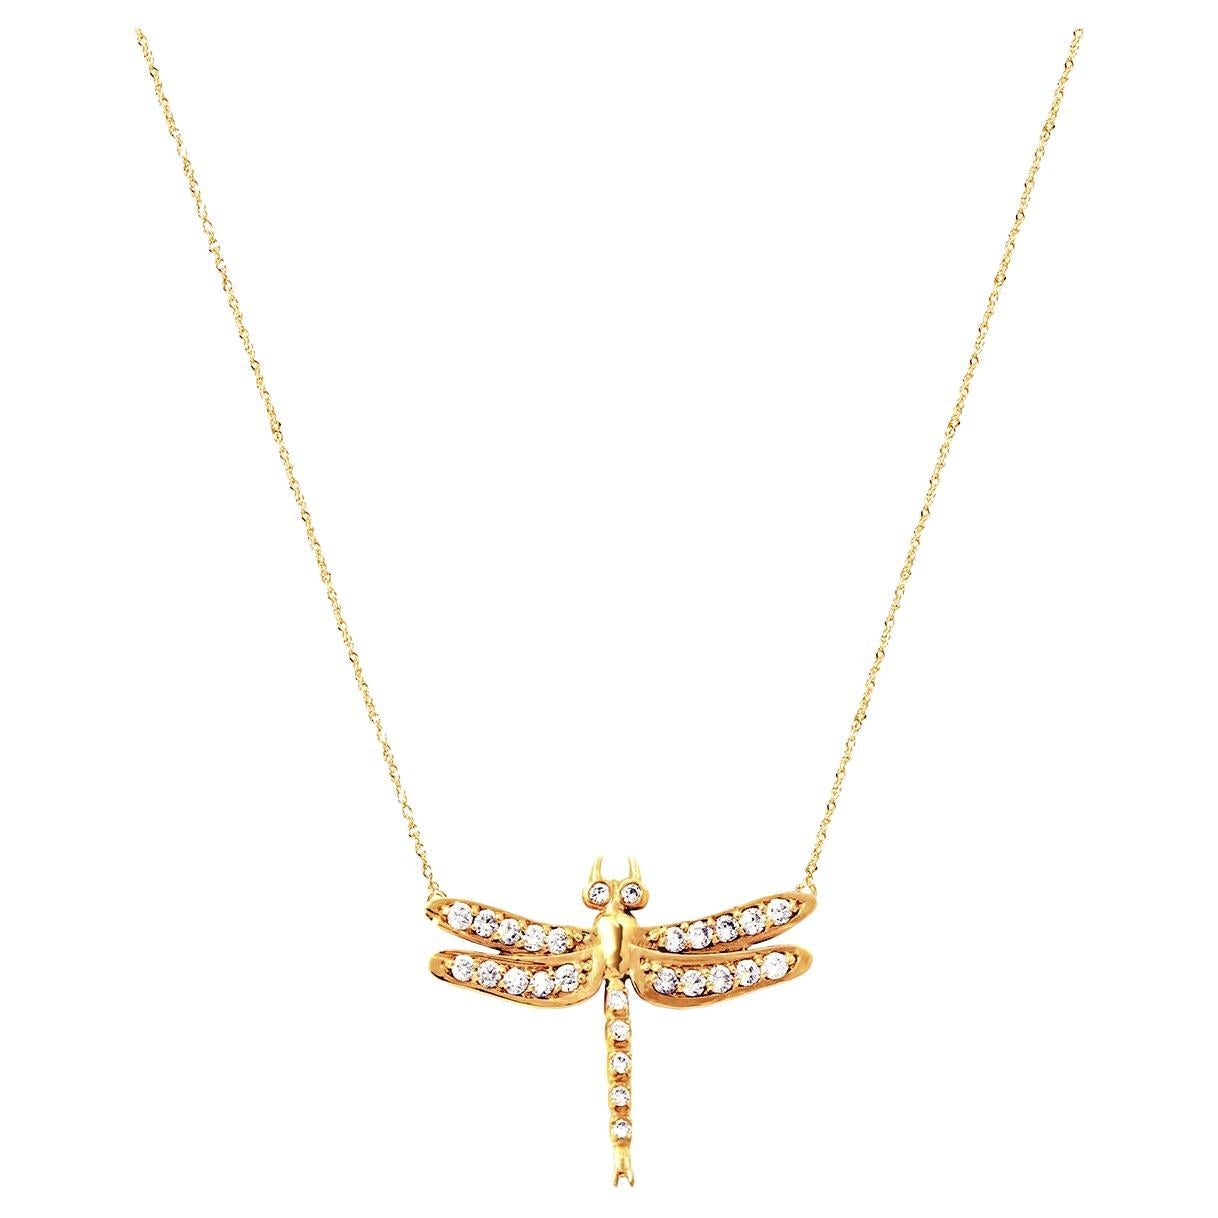 Small Dragonfly Necklace / Yellow Gold Plate White Sapphires For Sale